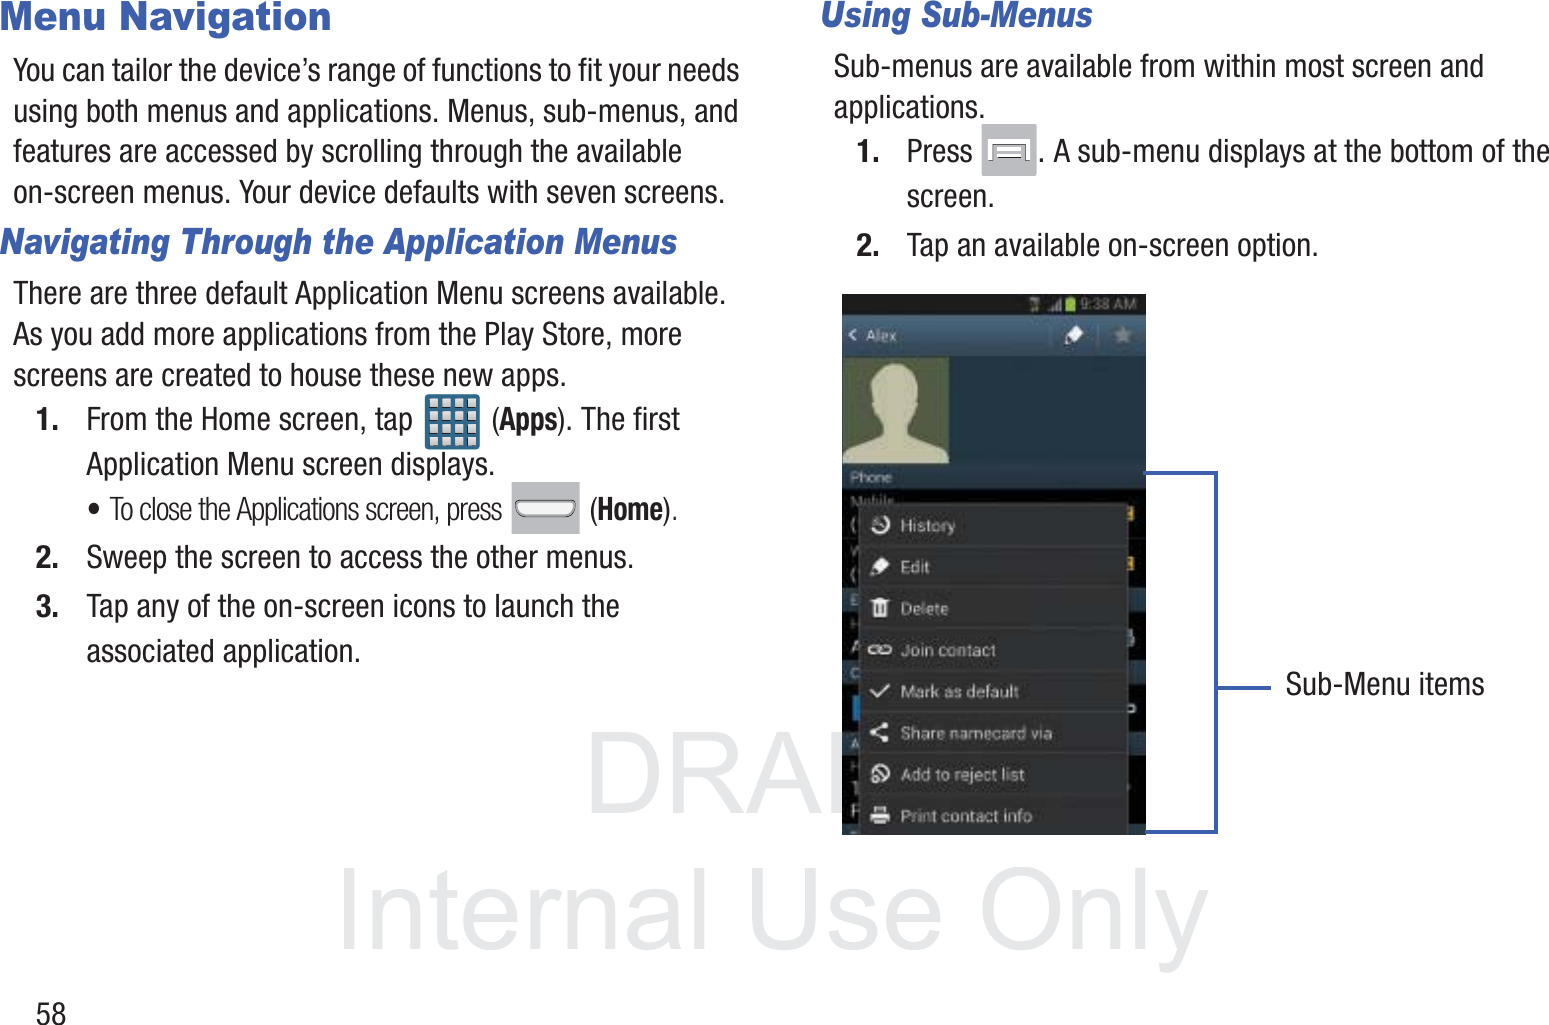 DRAFT InternalUse Only58Menu NavigationYou can tailor the device’s range of functions to fit your needs using both menus and applications. Menus, sub-menus, and features are accessed by scrolling through the available on-screen menus. Your device defaults with seven screens.Navigating Through the Application MenusThere are three default Application Menu screens available. As you add more applications from the Play Store, more screens are created to house these new apps.1. From the Home screen, tap   (Apps). The first Application Menu screen displays.•To close the Applications screen, press   (Home).2. Sweep the screen to access the other menus.3. Tap any of the on-screen icons to launch the associated application.Using Sub-MenusSub-menus are available from within most screen and applications. 1. Press  . A sub-menu displays at the bottom of the screen.2. Tap an available on-screen option.   Sub-Menu items